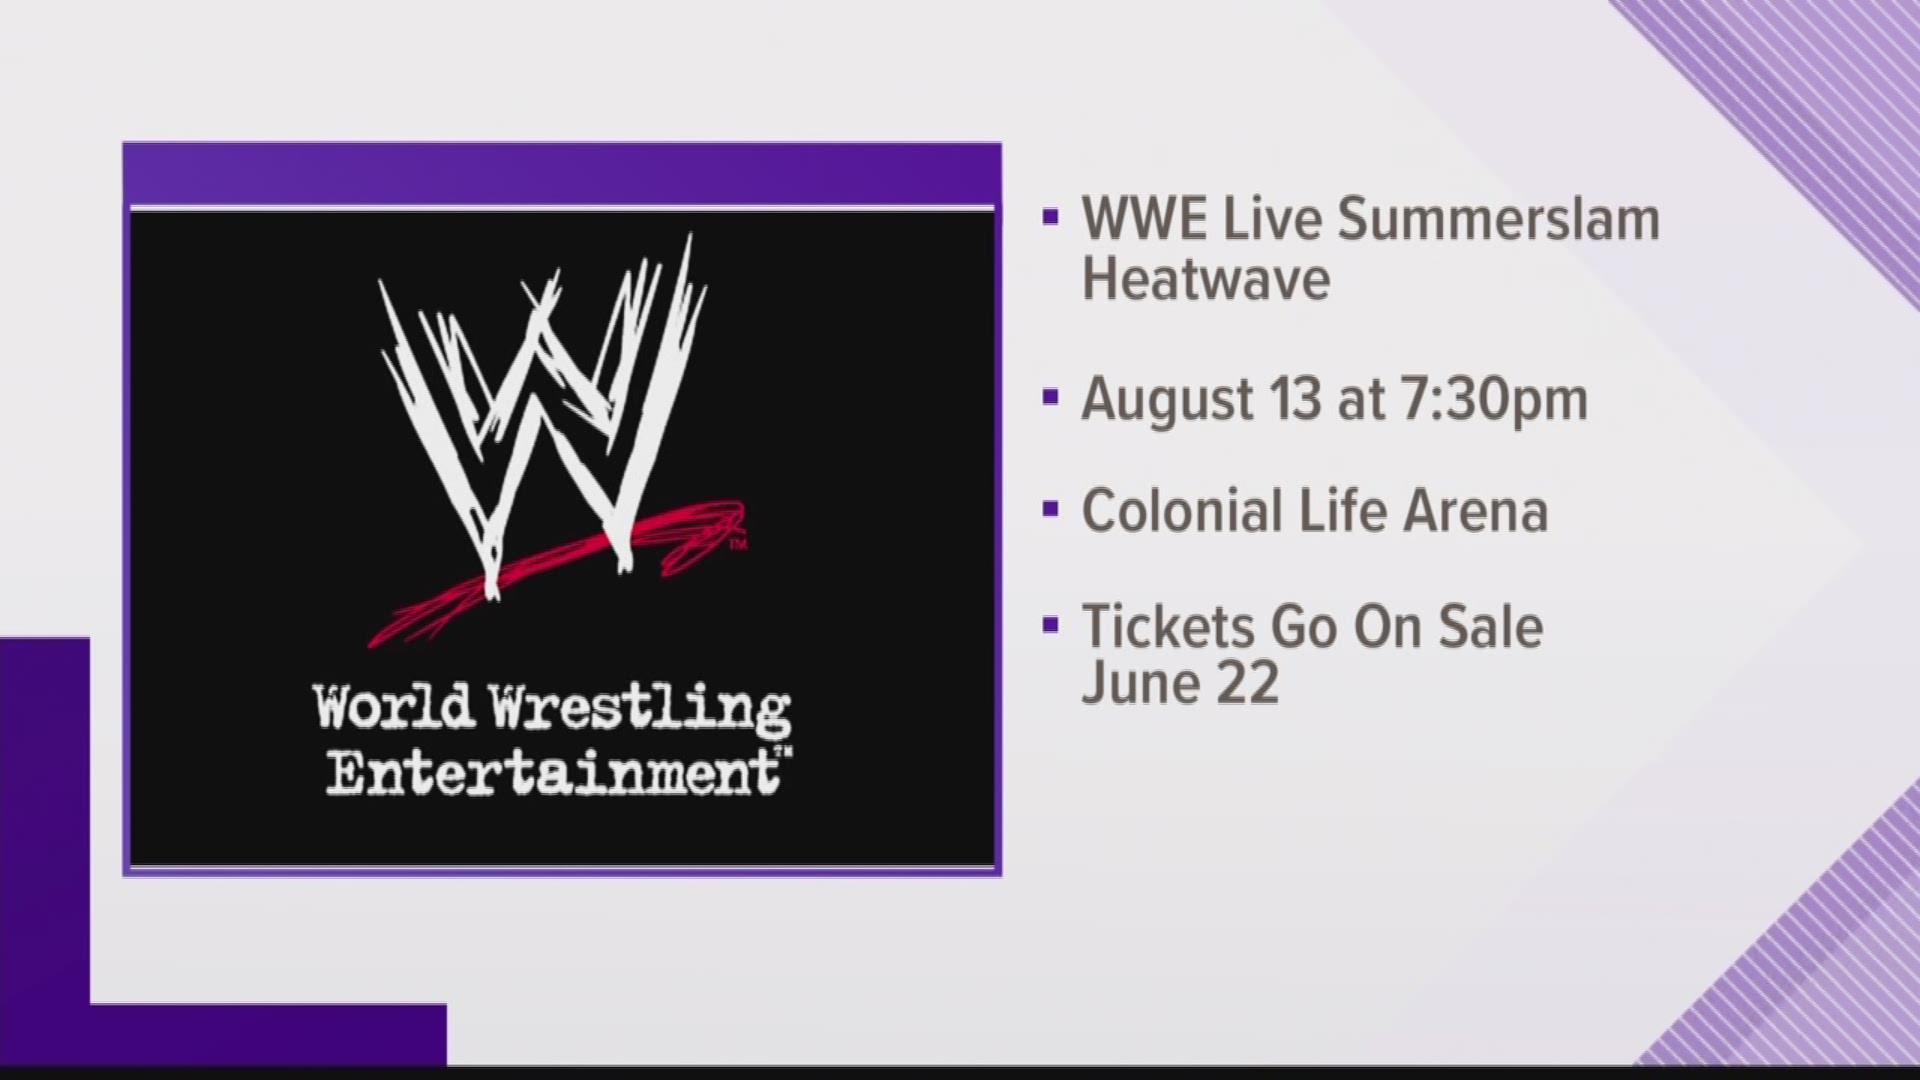 WWE returning to The Colonial Life Arena for their Summerslam Heatwave Tour  August 13